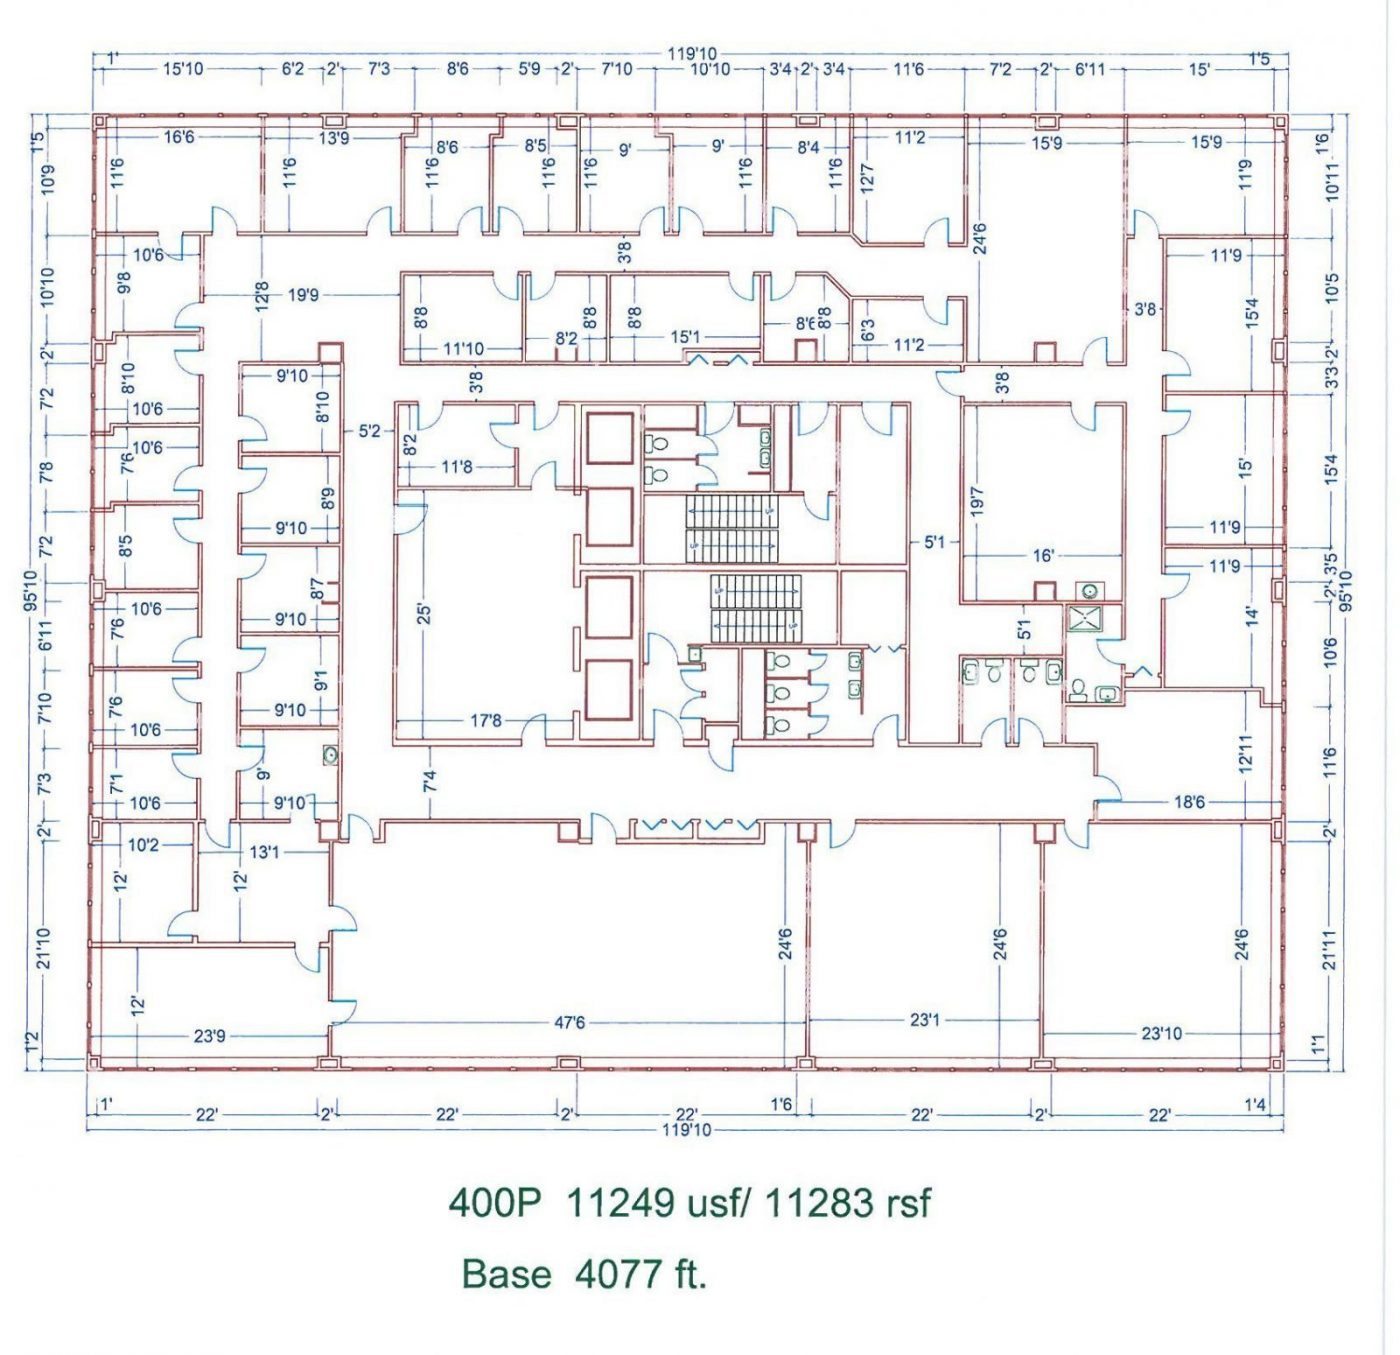 Floor Plan for unit 400P at 20755 Greenfield Rd - 4th Floor Southfield, MI 48075